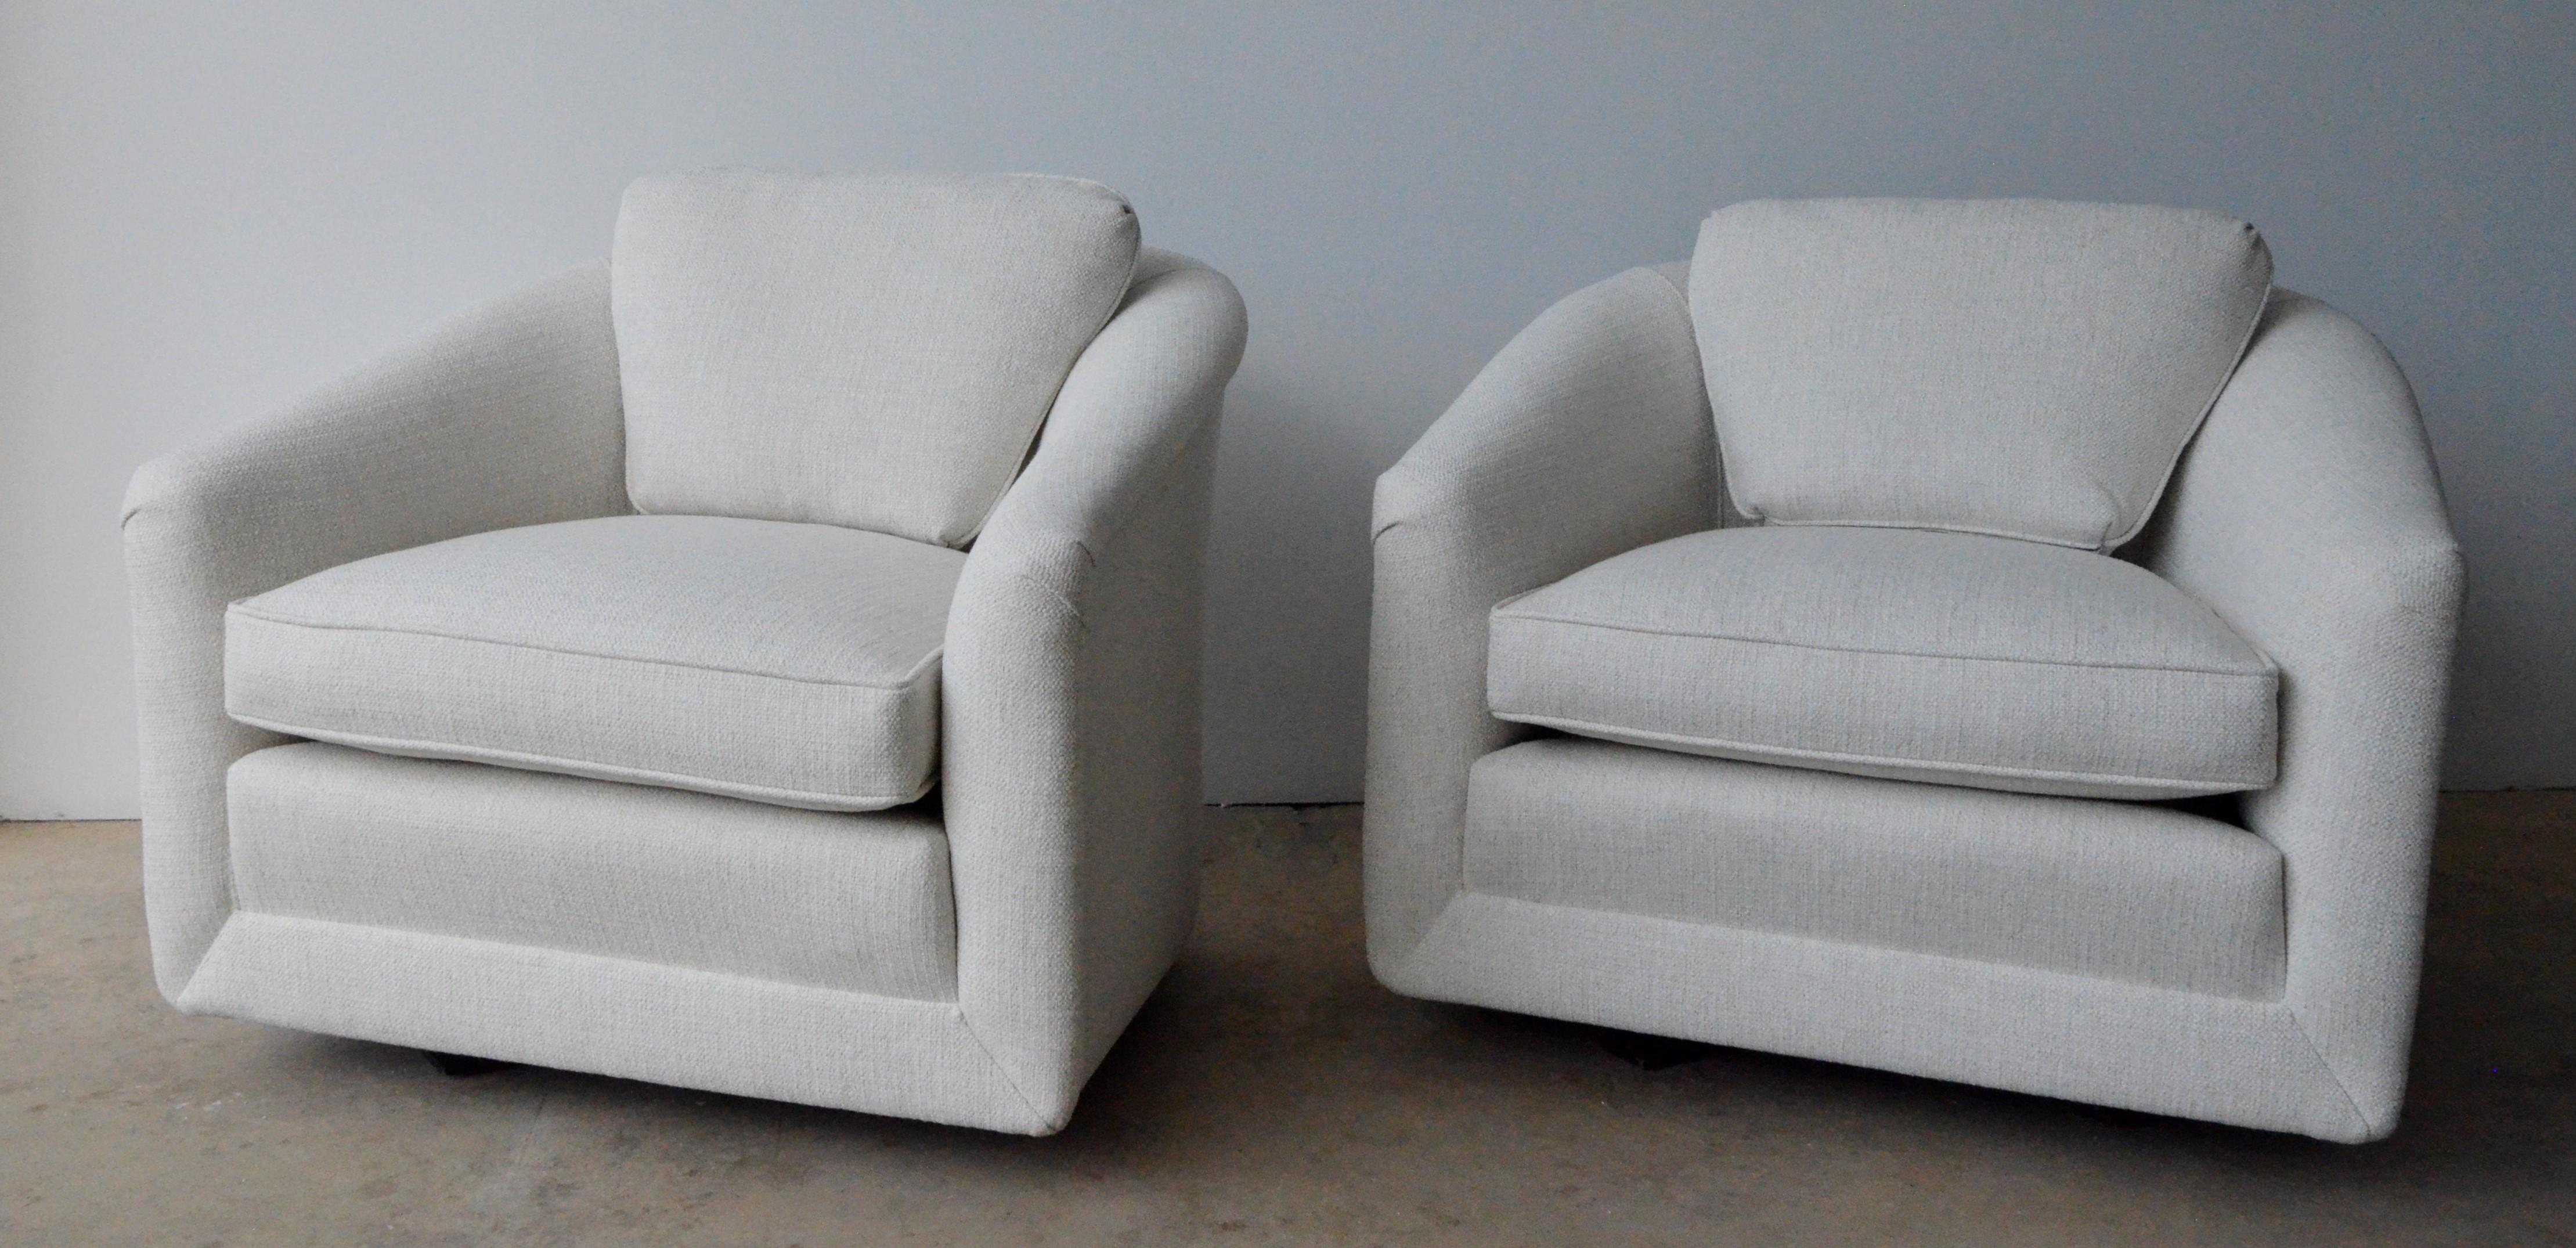 Offered is a pair of Mid-Century Modern Milo Baughman style swivel chairs with non-exposed wood base and back cushion in newly upholstered creamy white tweed. This pair of swivel chairs exudes luxury in style, material and color. The comfort and